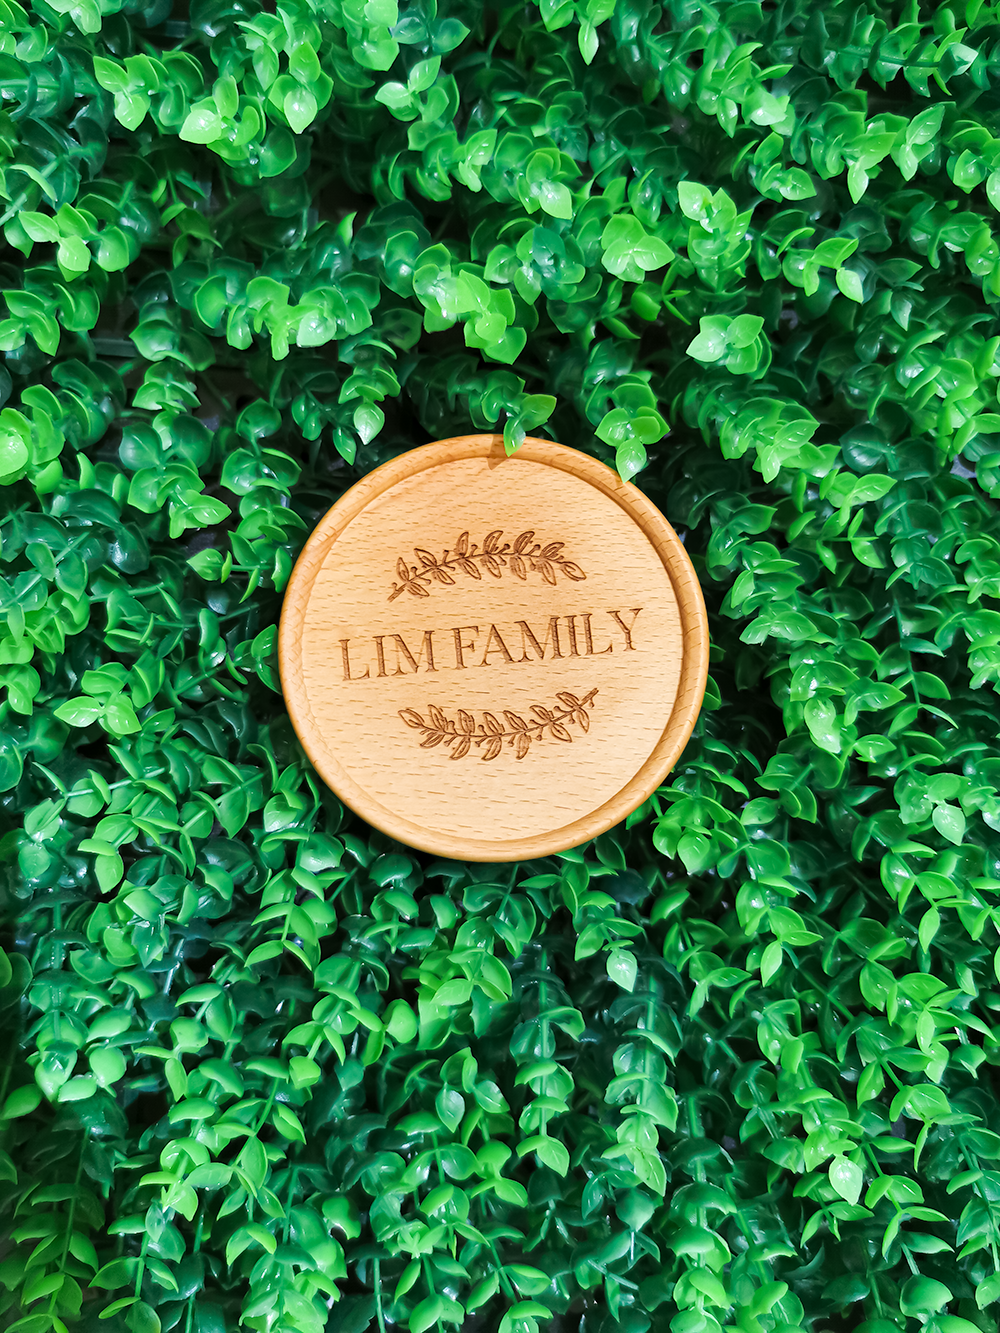 "Lim Family" Wood Coaster - 1 pcs - Gifts by Art Tree